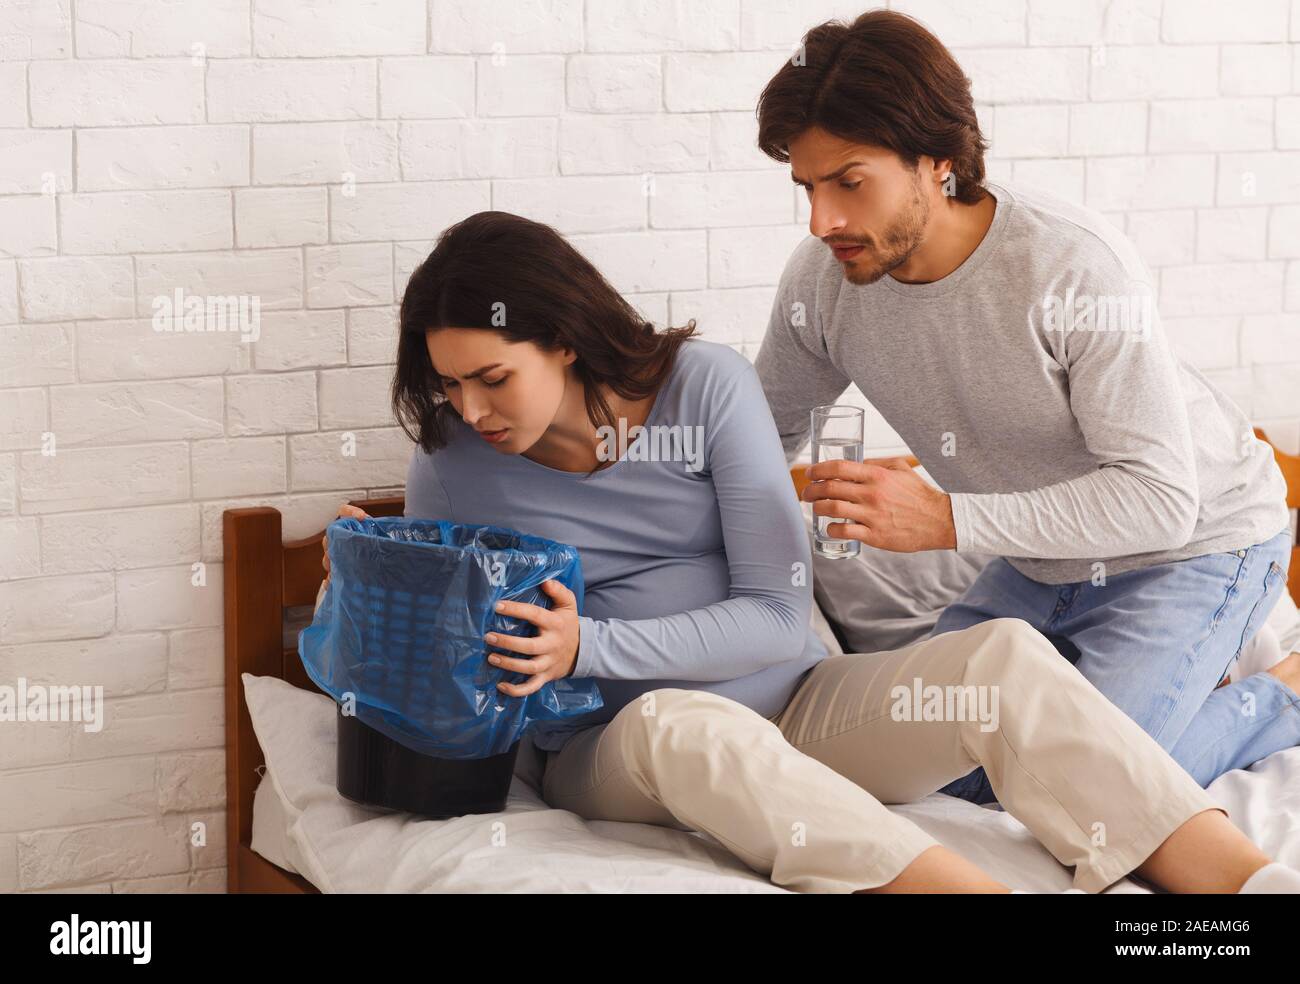 Pregnant woman suffering from morning sickness, vomiting to garbage can Stock Photo